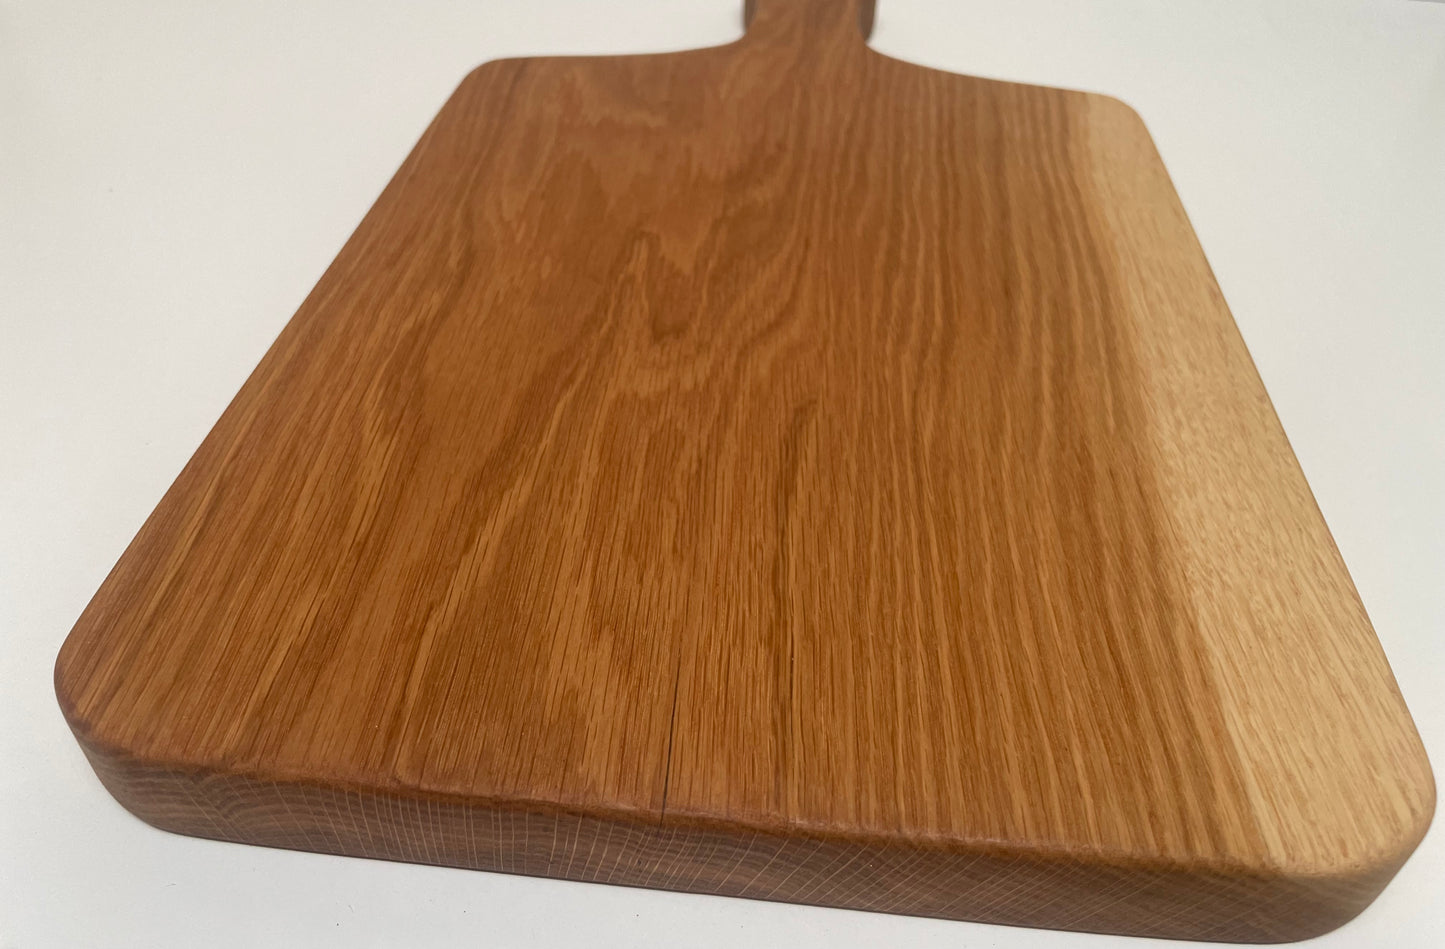 23SV01 - Large Solid Cherry Handle Board